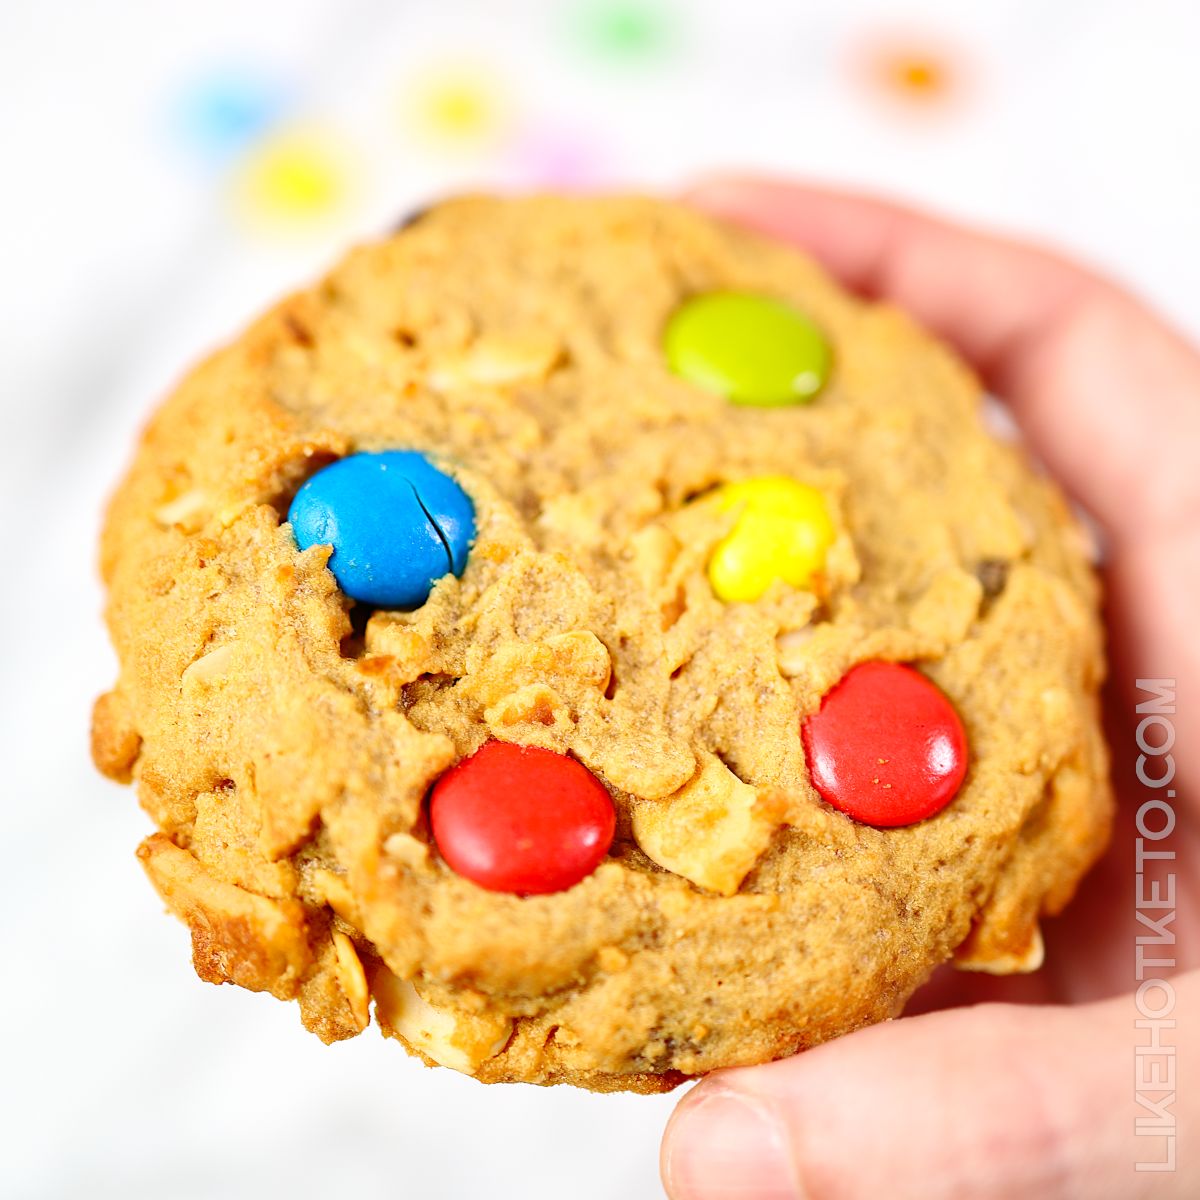 A large keto monster cookie with colorful m&m's.